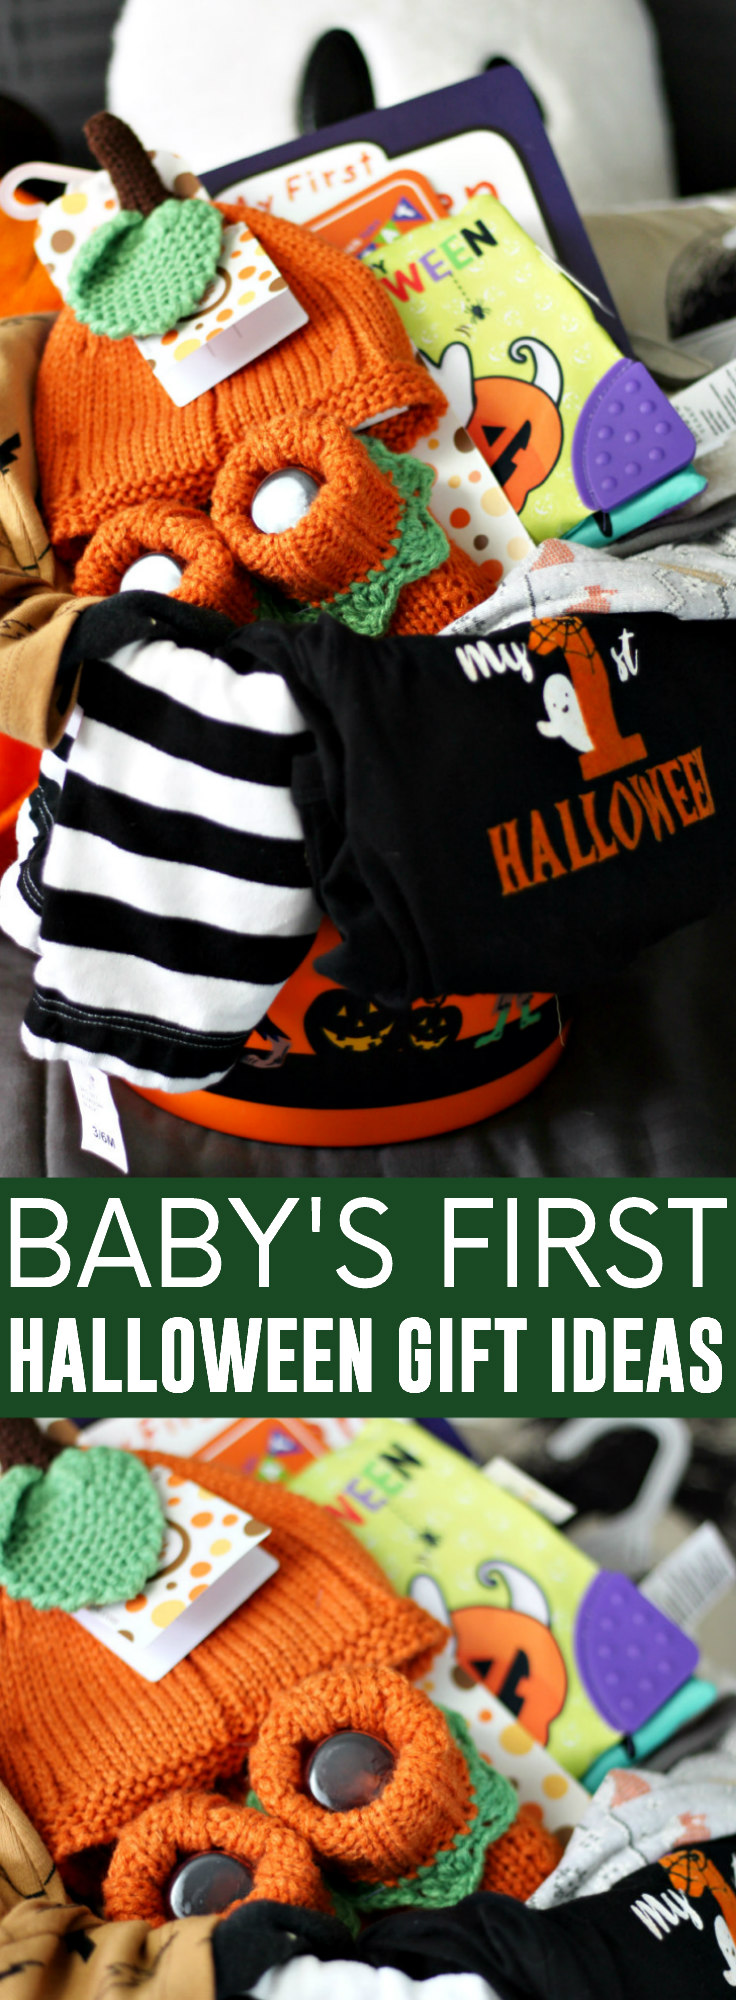 Baby's First Halloween Gift Ideas pinnable image.